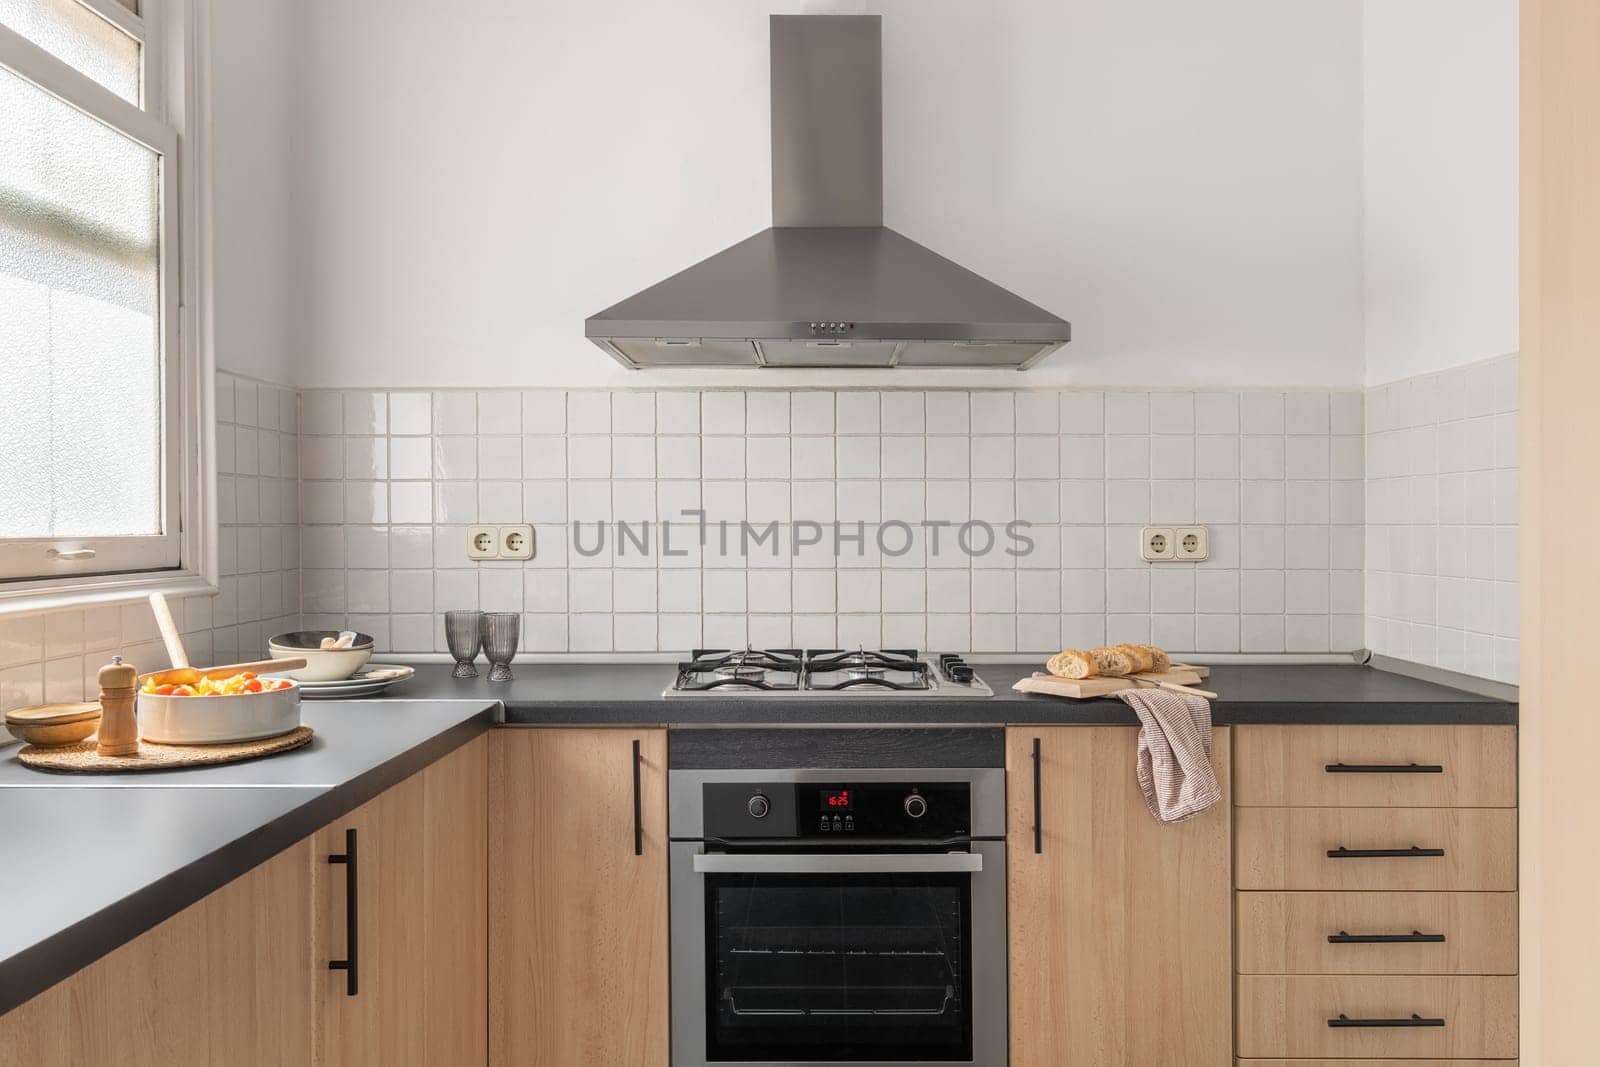 Bright clean kitchen with contemporary design, modern cabinetry, gas stove oven, sink, and ample storage for utensils and cookware. Ideal for culinary exploration home showcase interior.